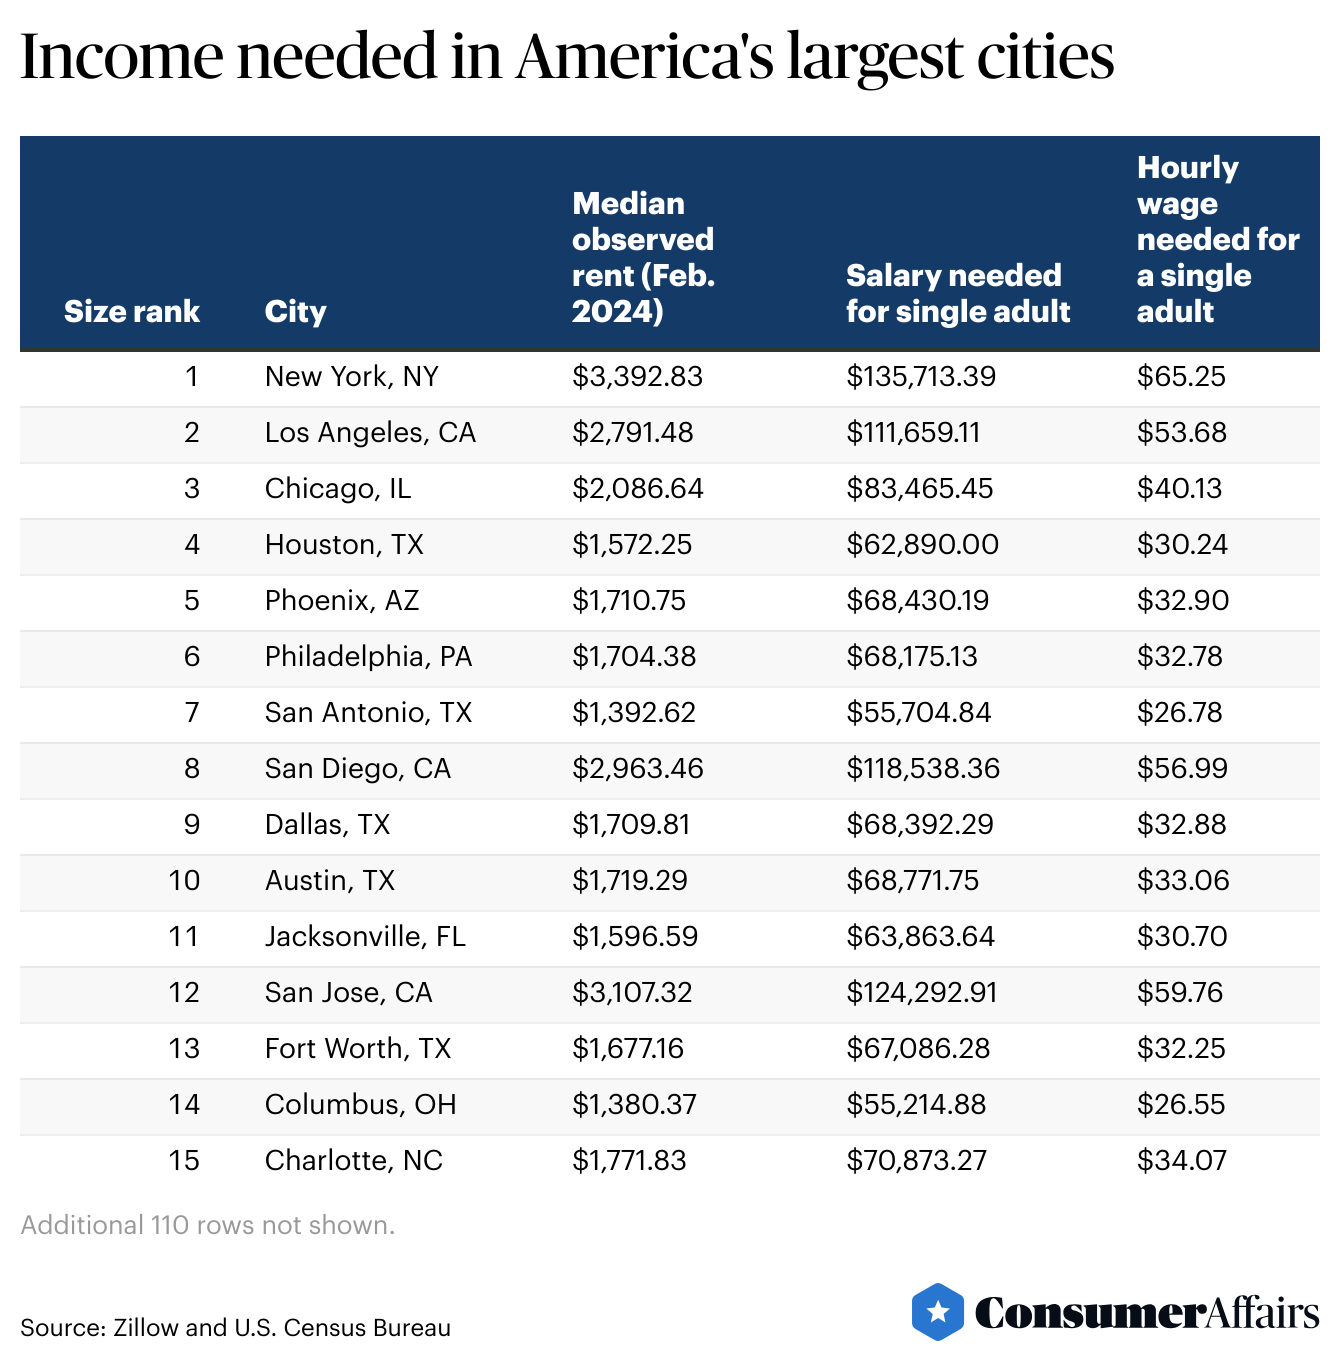 Table showing the Top 15 “Income needed in America